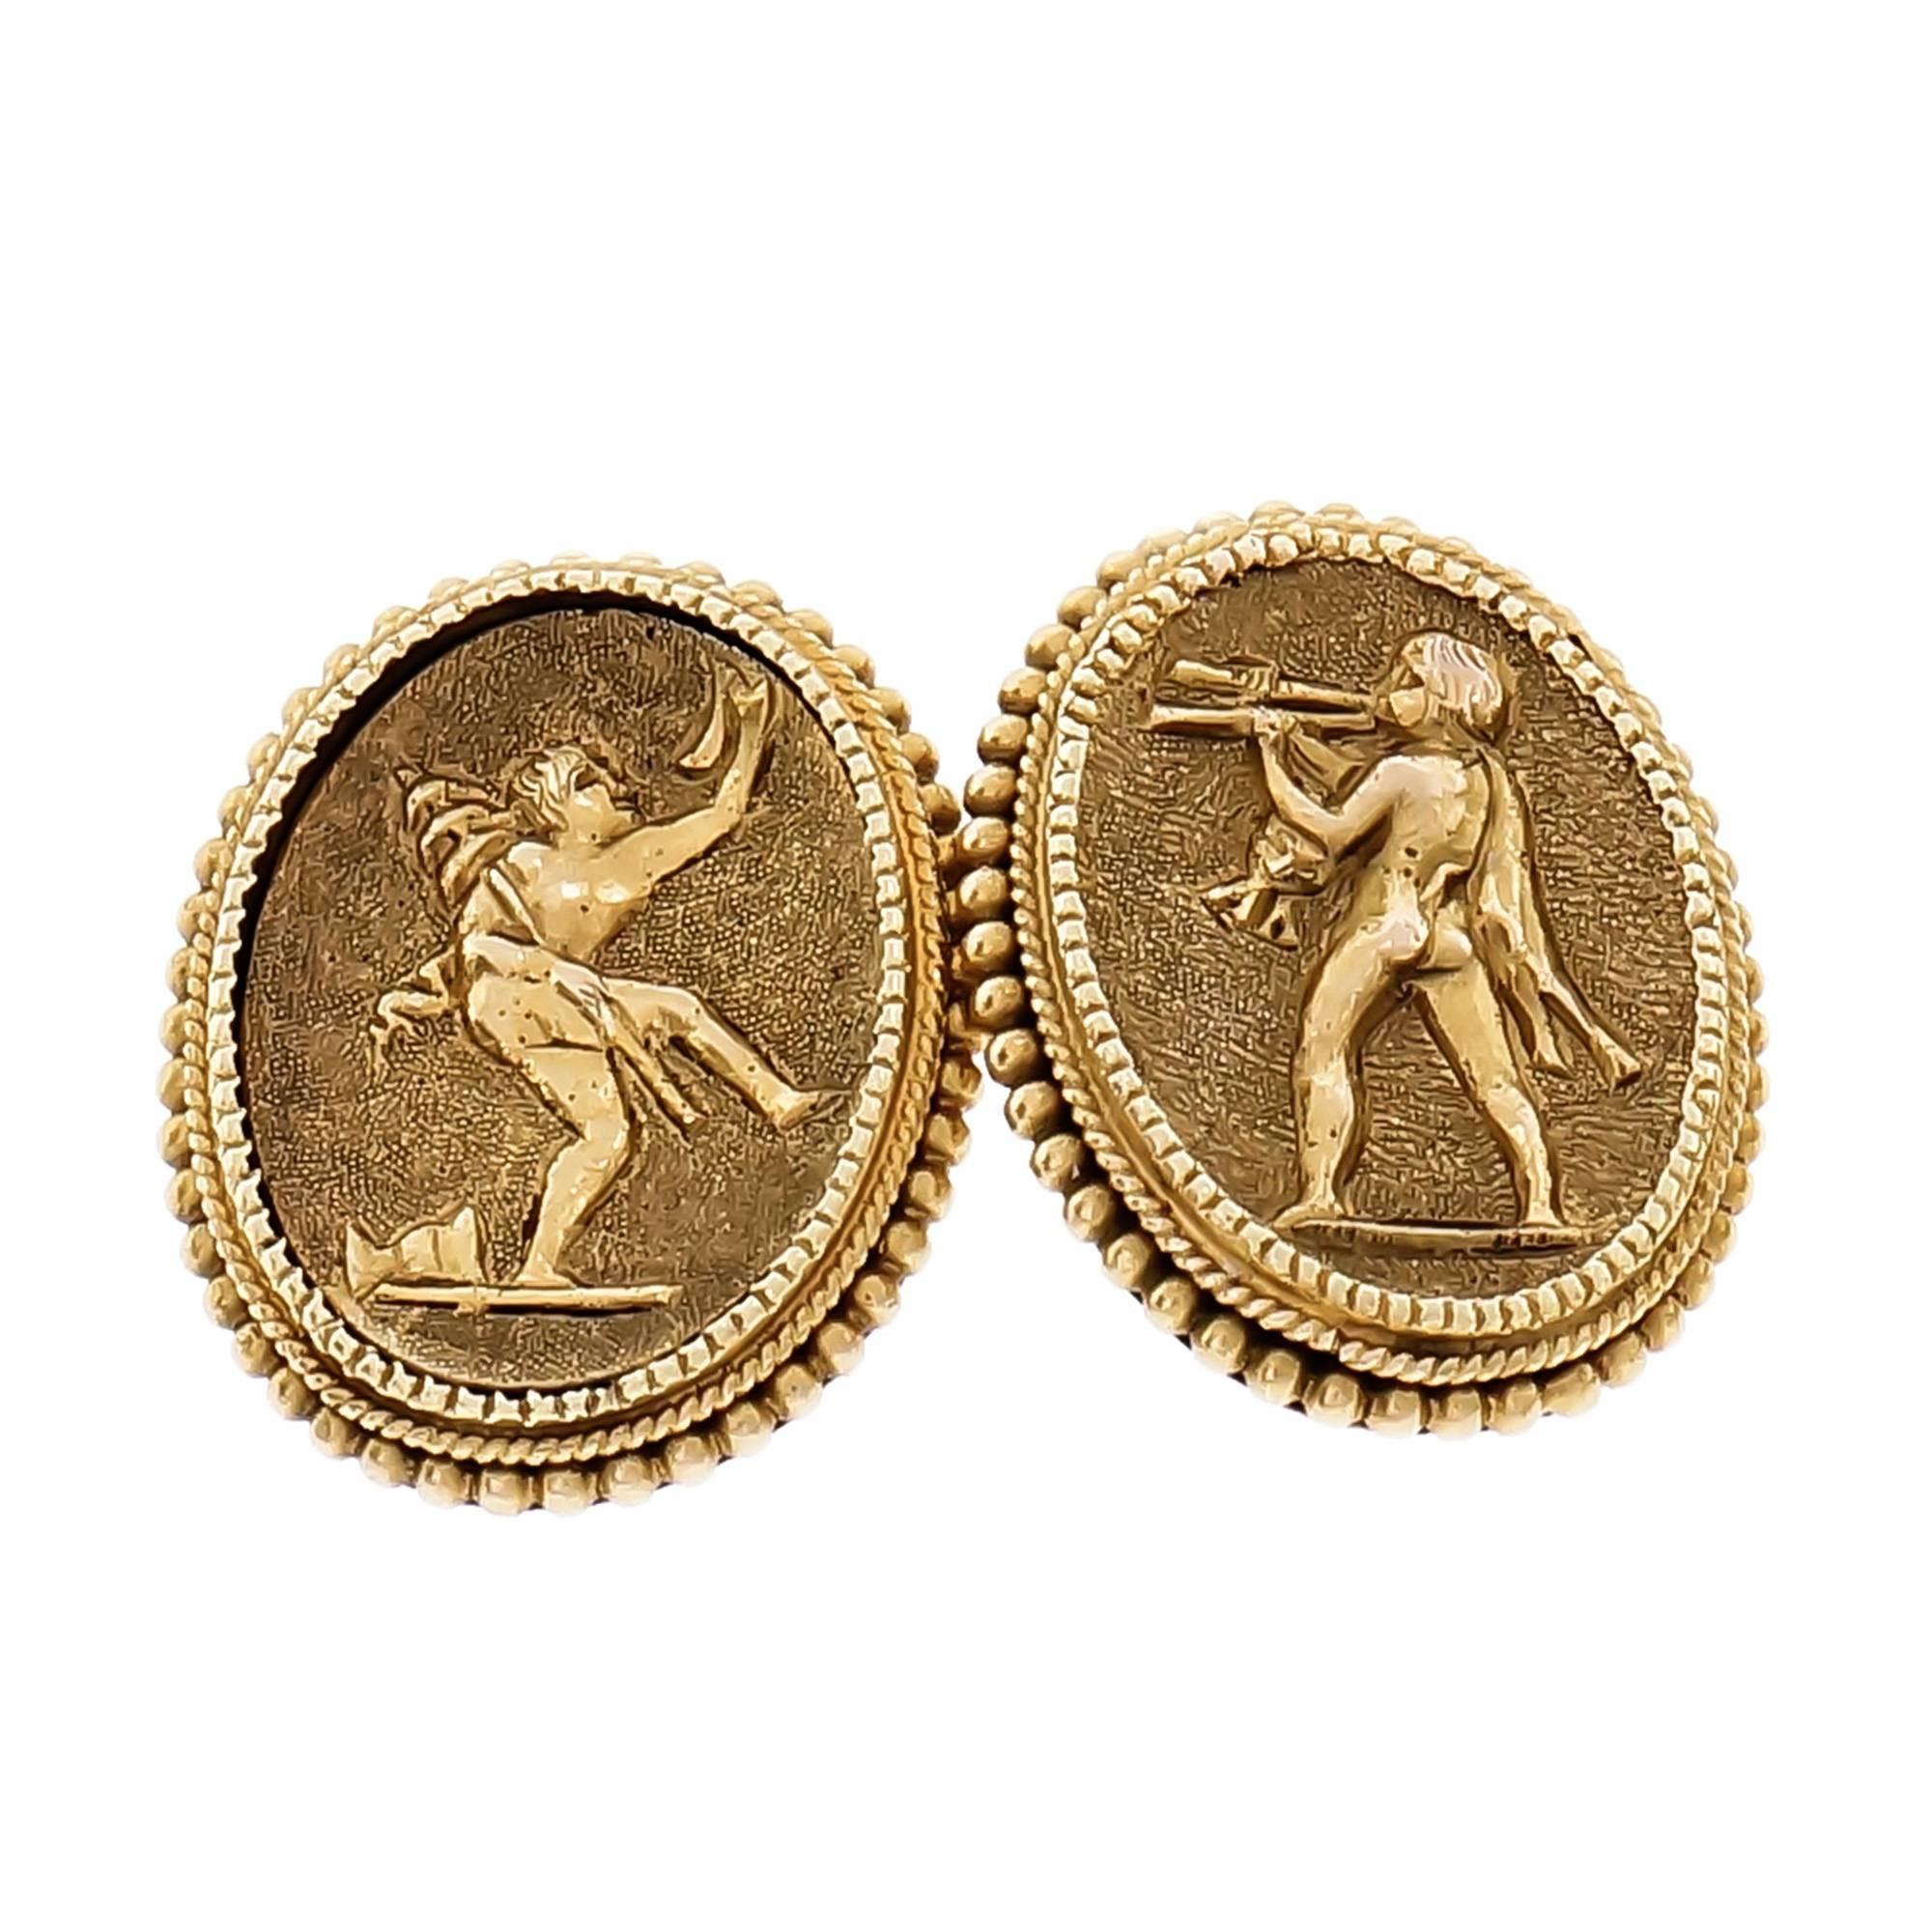 Etruscan Revival Engraved Double Sided Cufflinks In Good Condition For Sale In Stamford, CT